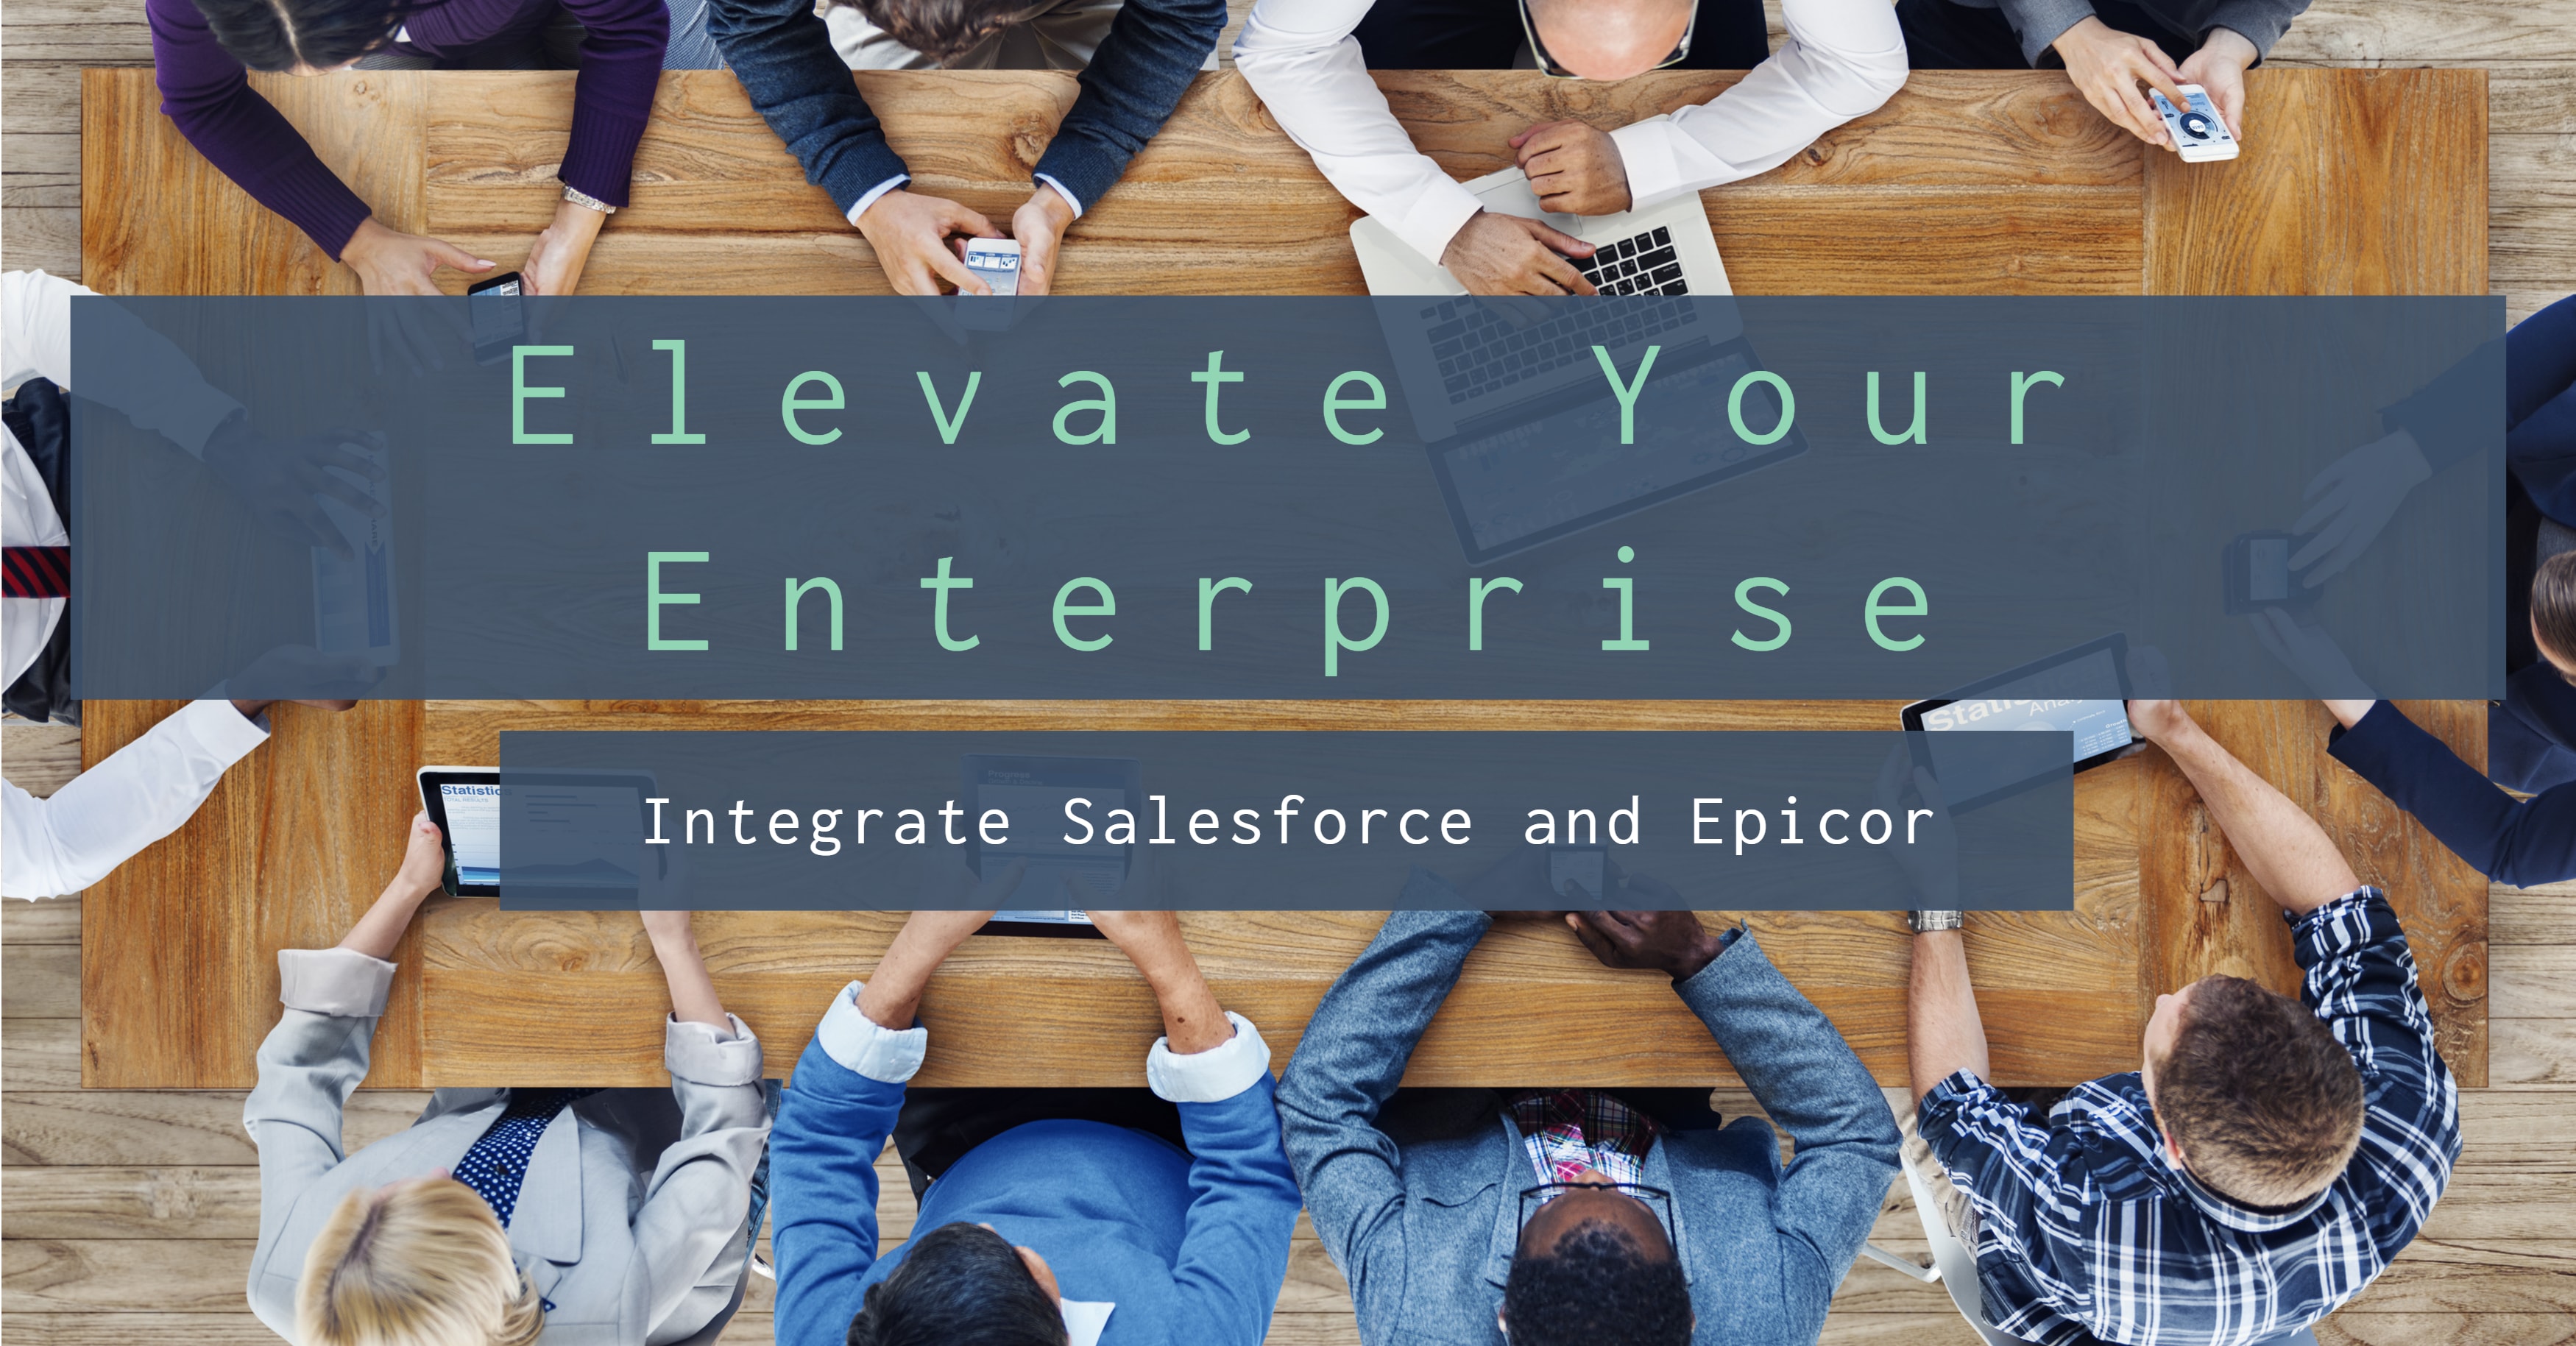 Integrate Salesforce and Epicor